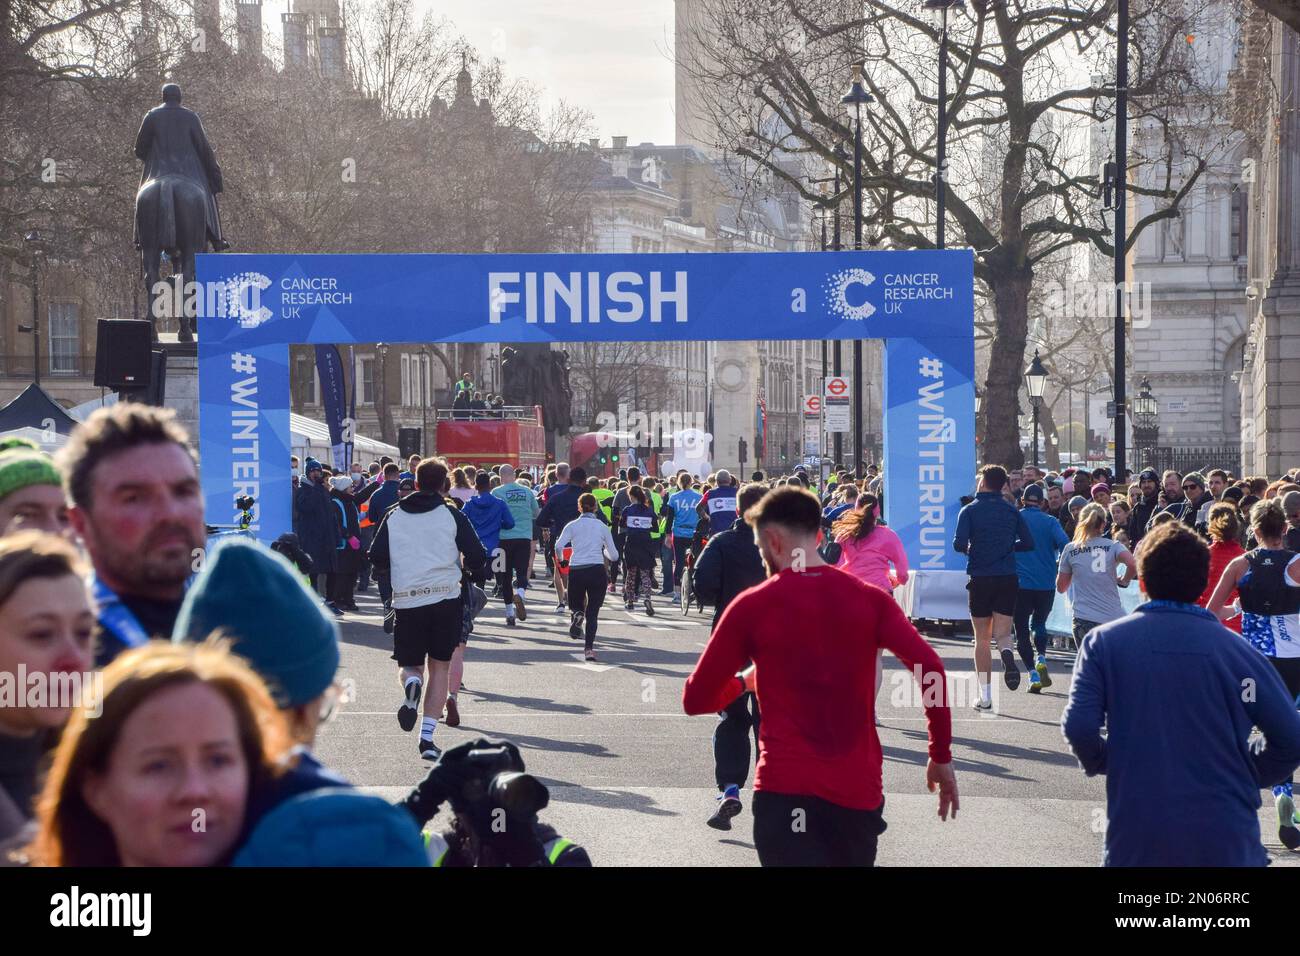 London, UK. 5th February 2023. Participants reach the finish line in Whitehall during this year's Cancer Research UK Winter Run in central London. Thousands of runners take part in the annual event raising funds for cancer research. Credit: Vuk Valcic/Alamy Live News Stock Photo